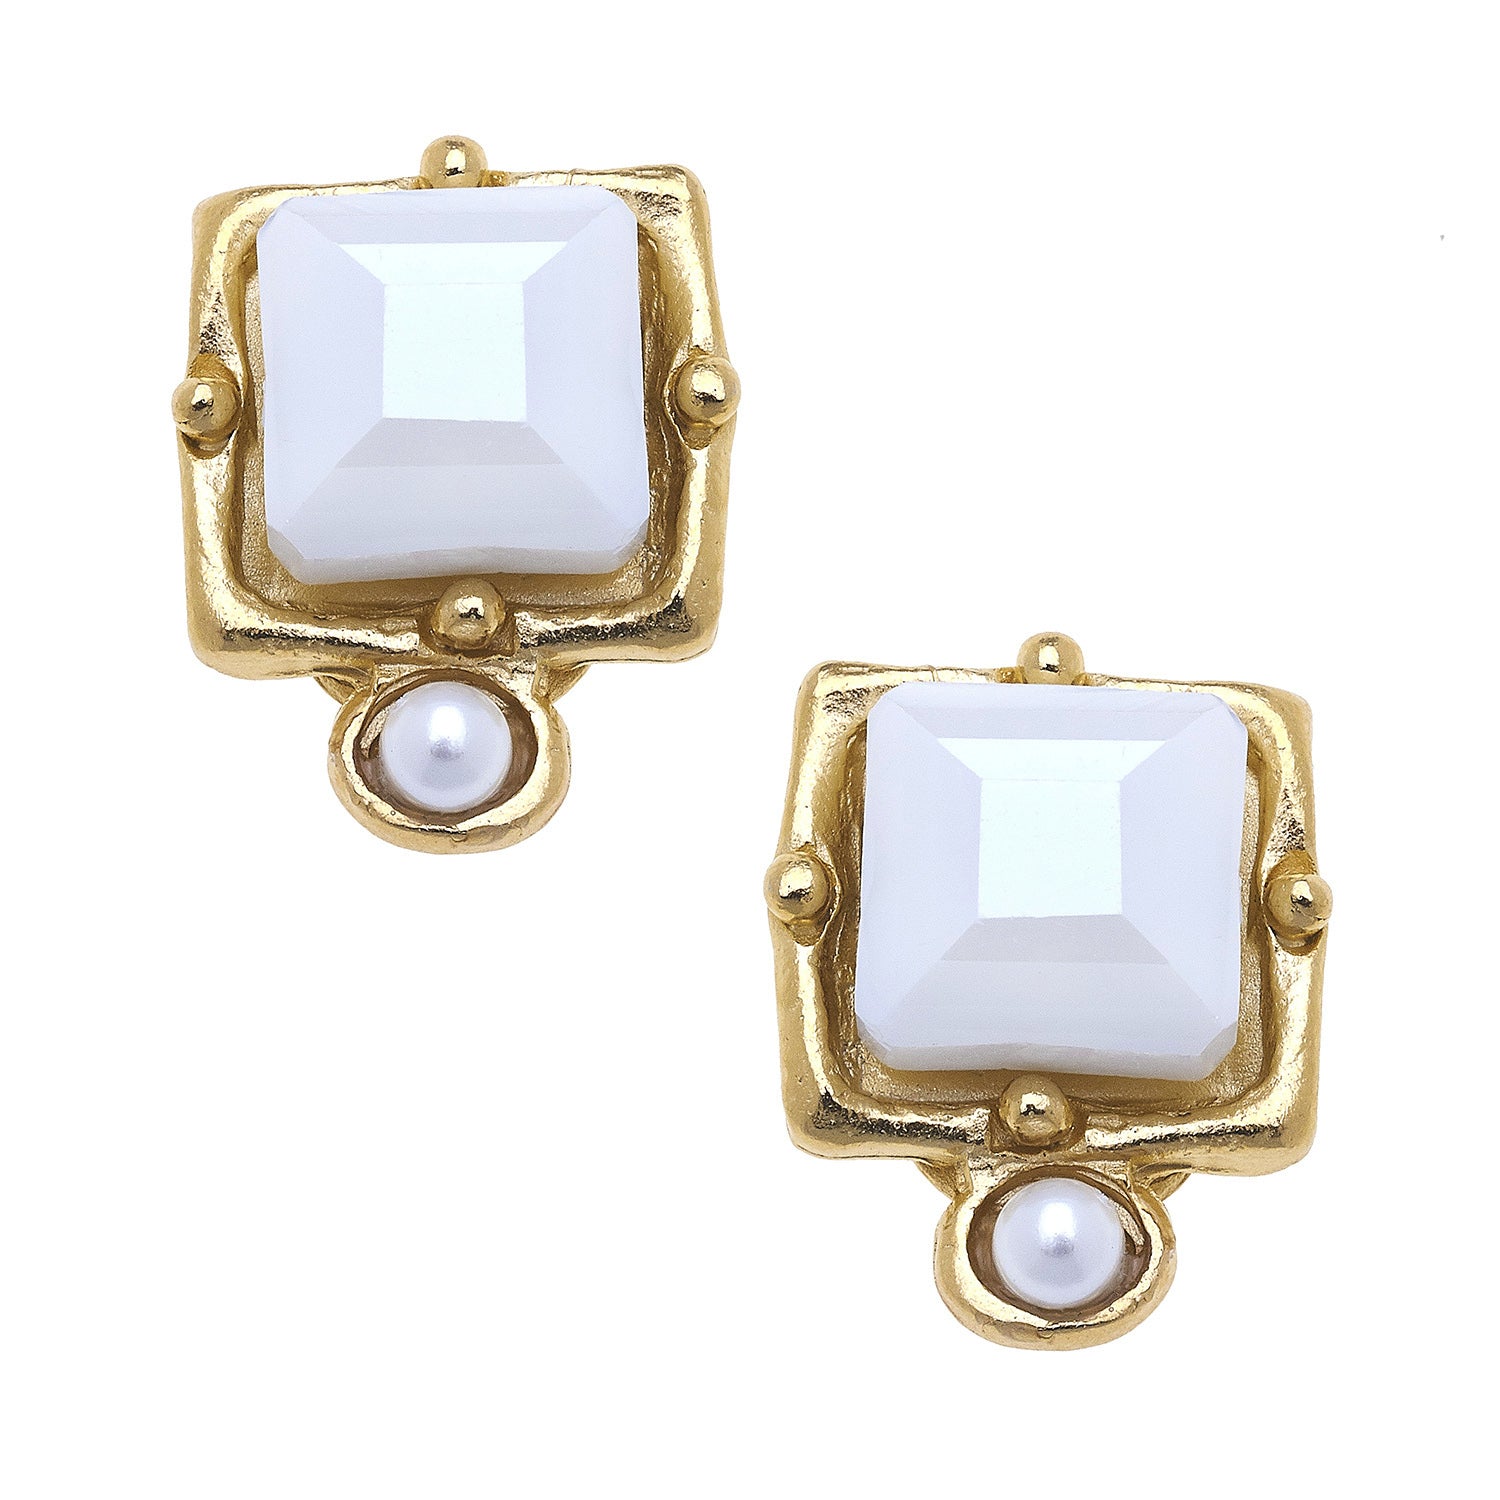 Susan Shaw Handcast Gold Plated Square Crystal CLIP Earrings